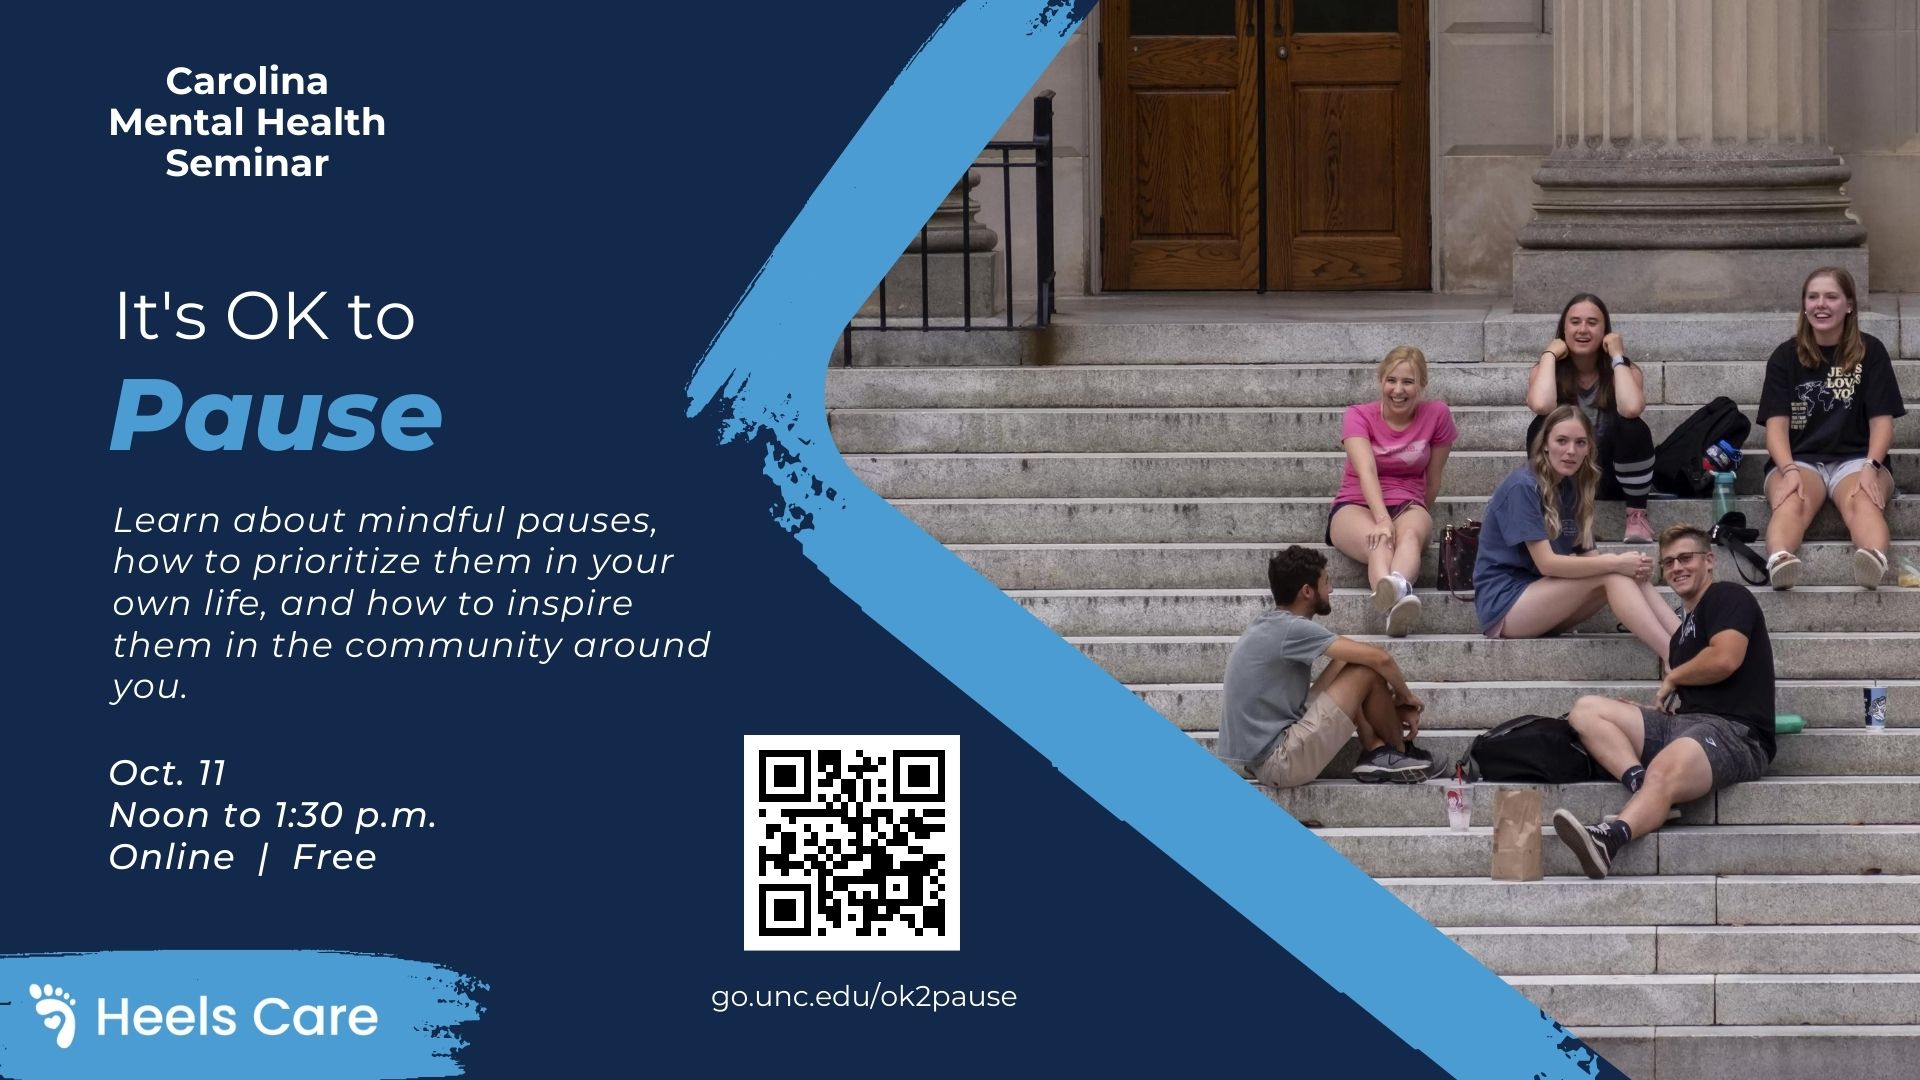 image of people sitting on steps to the library. text "Carolina Mental Health Seminar It's OK to Pause"